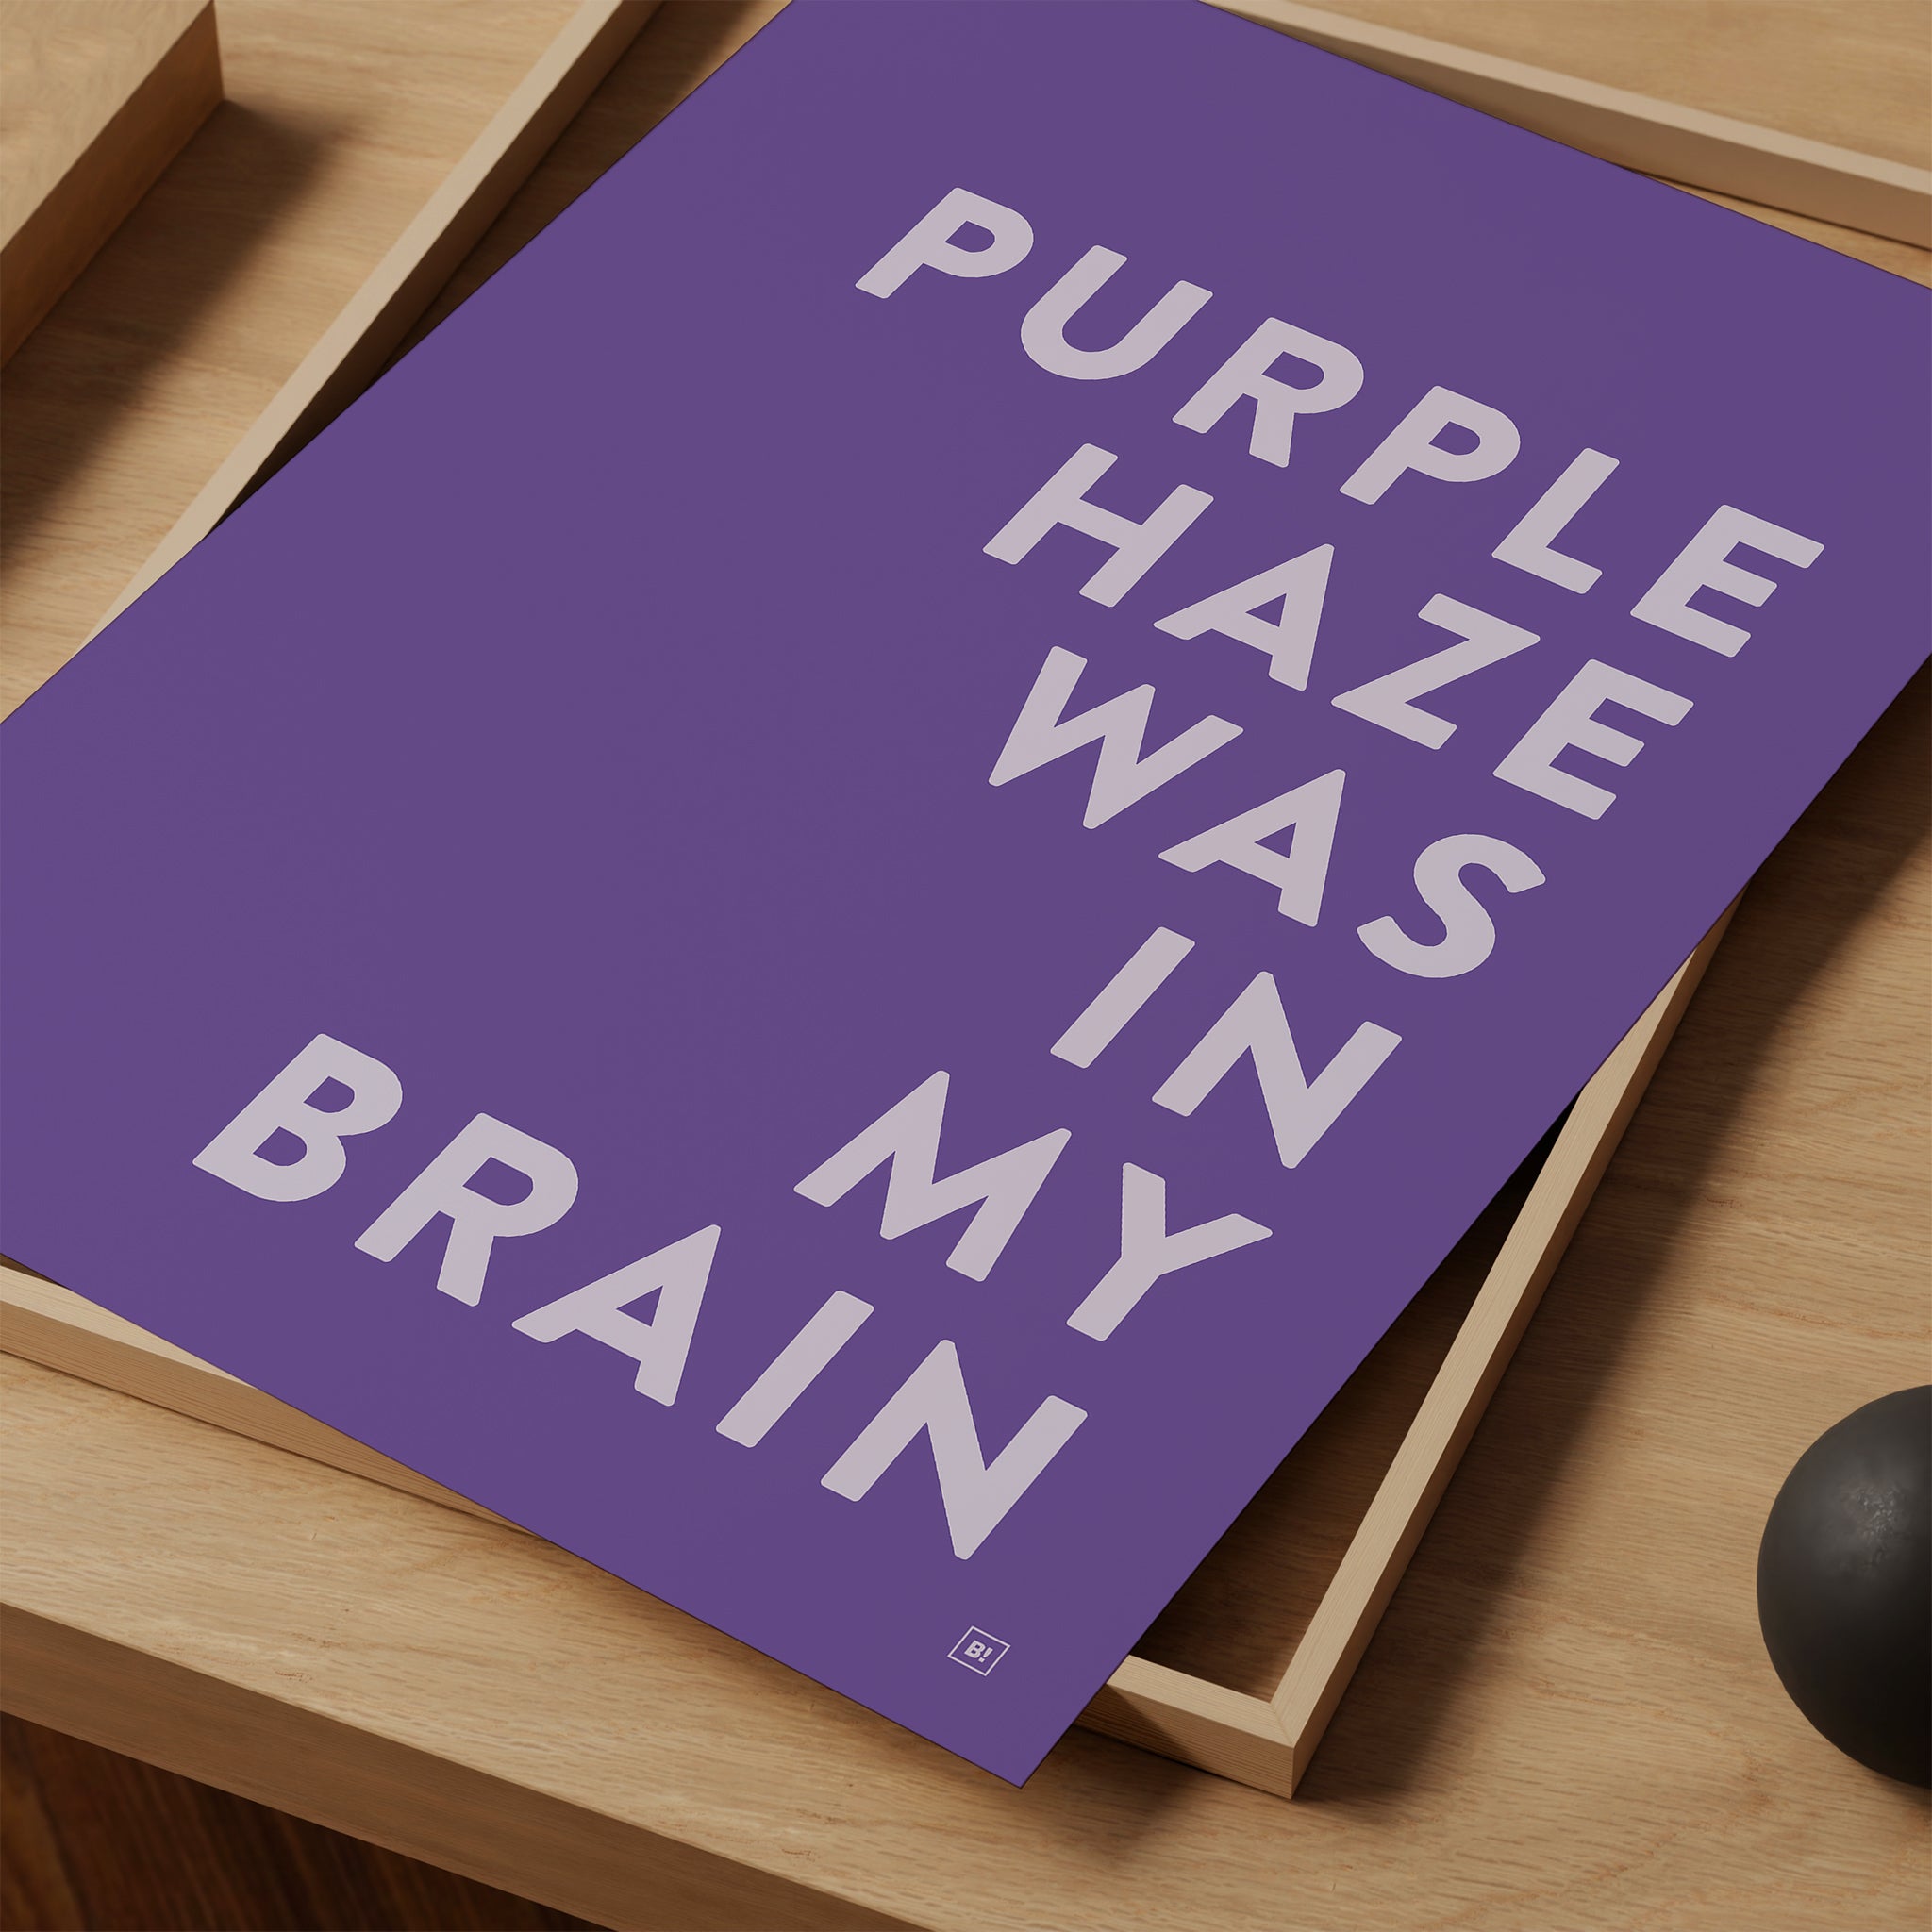 Be inspired by our Jimi Hendrix "Purple Haze Was In My Brain" lyric art print! This artwork was printed using the giclée process on archival acid-free paper and is presented as a print close-up, capturing its timeless beauty in every detail.